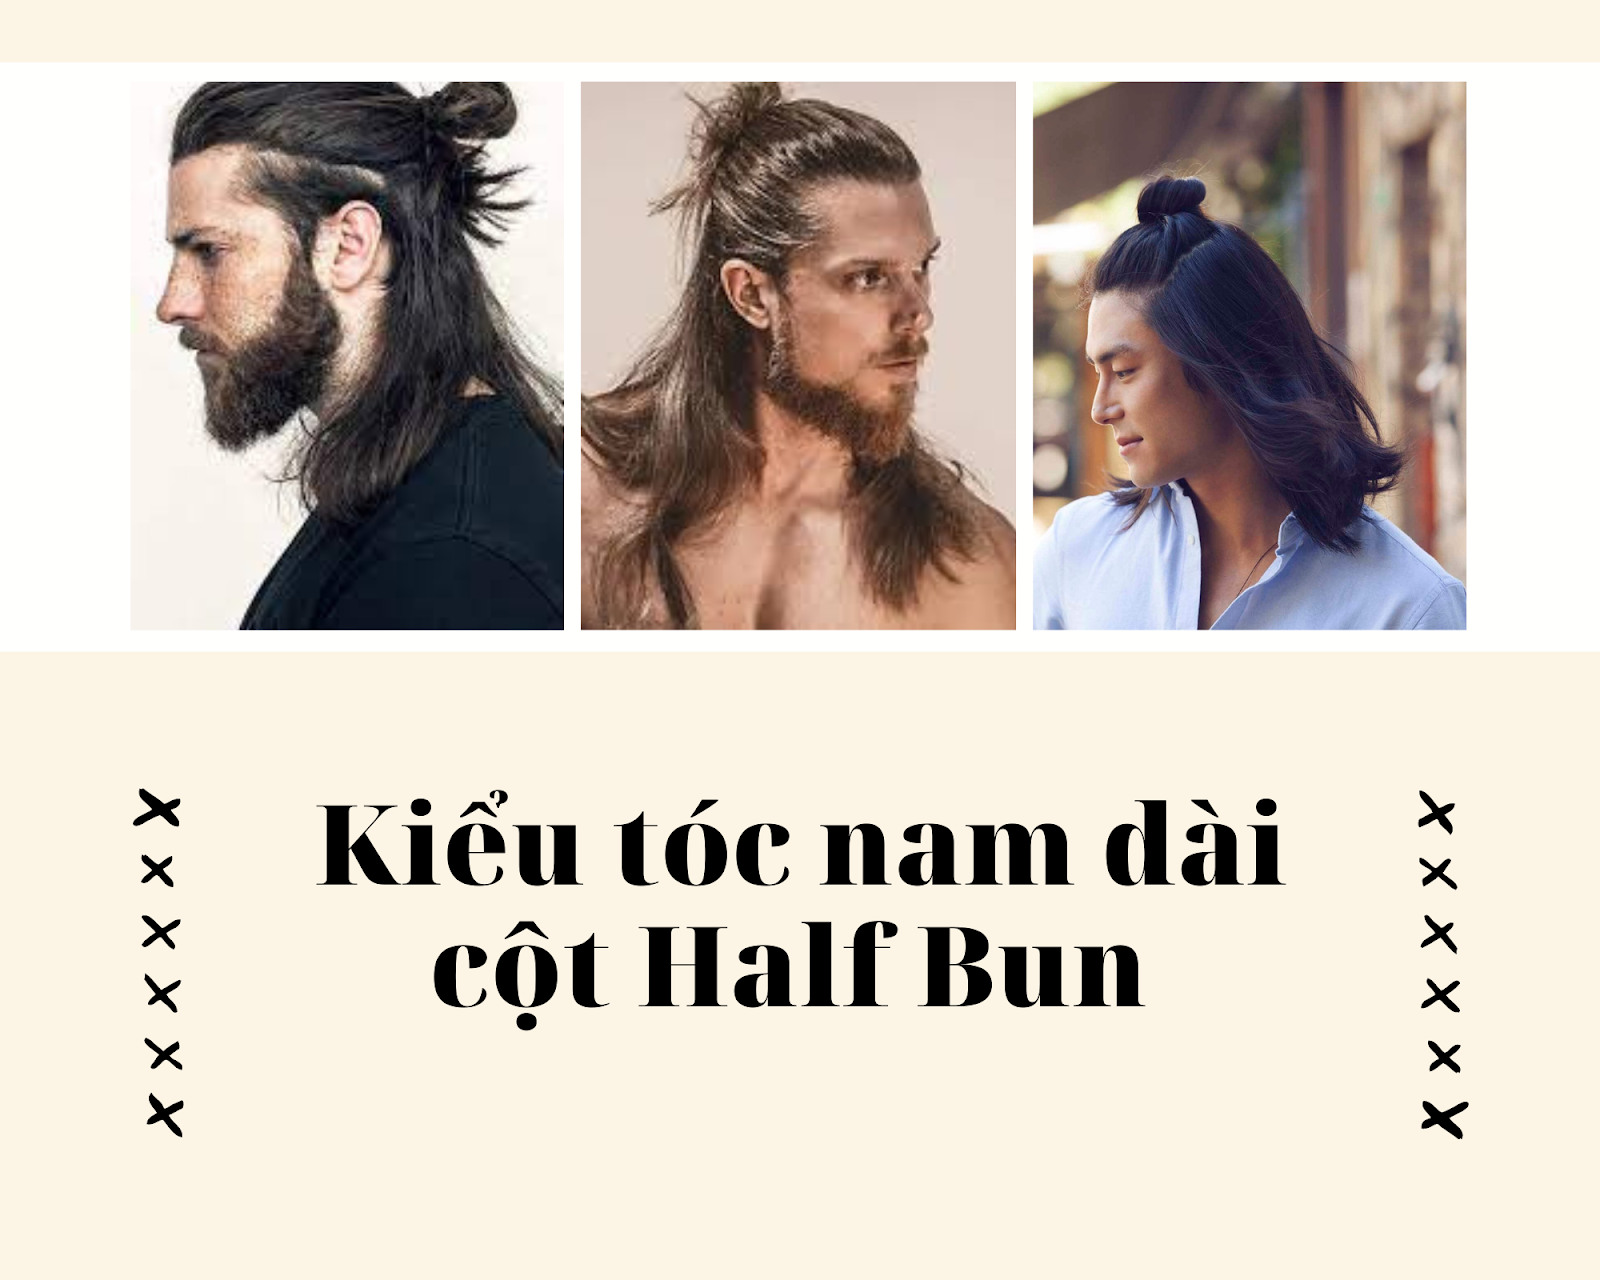 Man Buns on Celebrities | Male Hairstyles